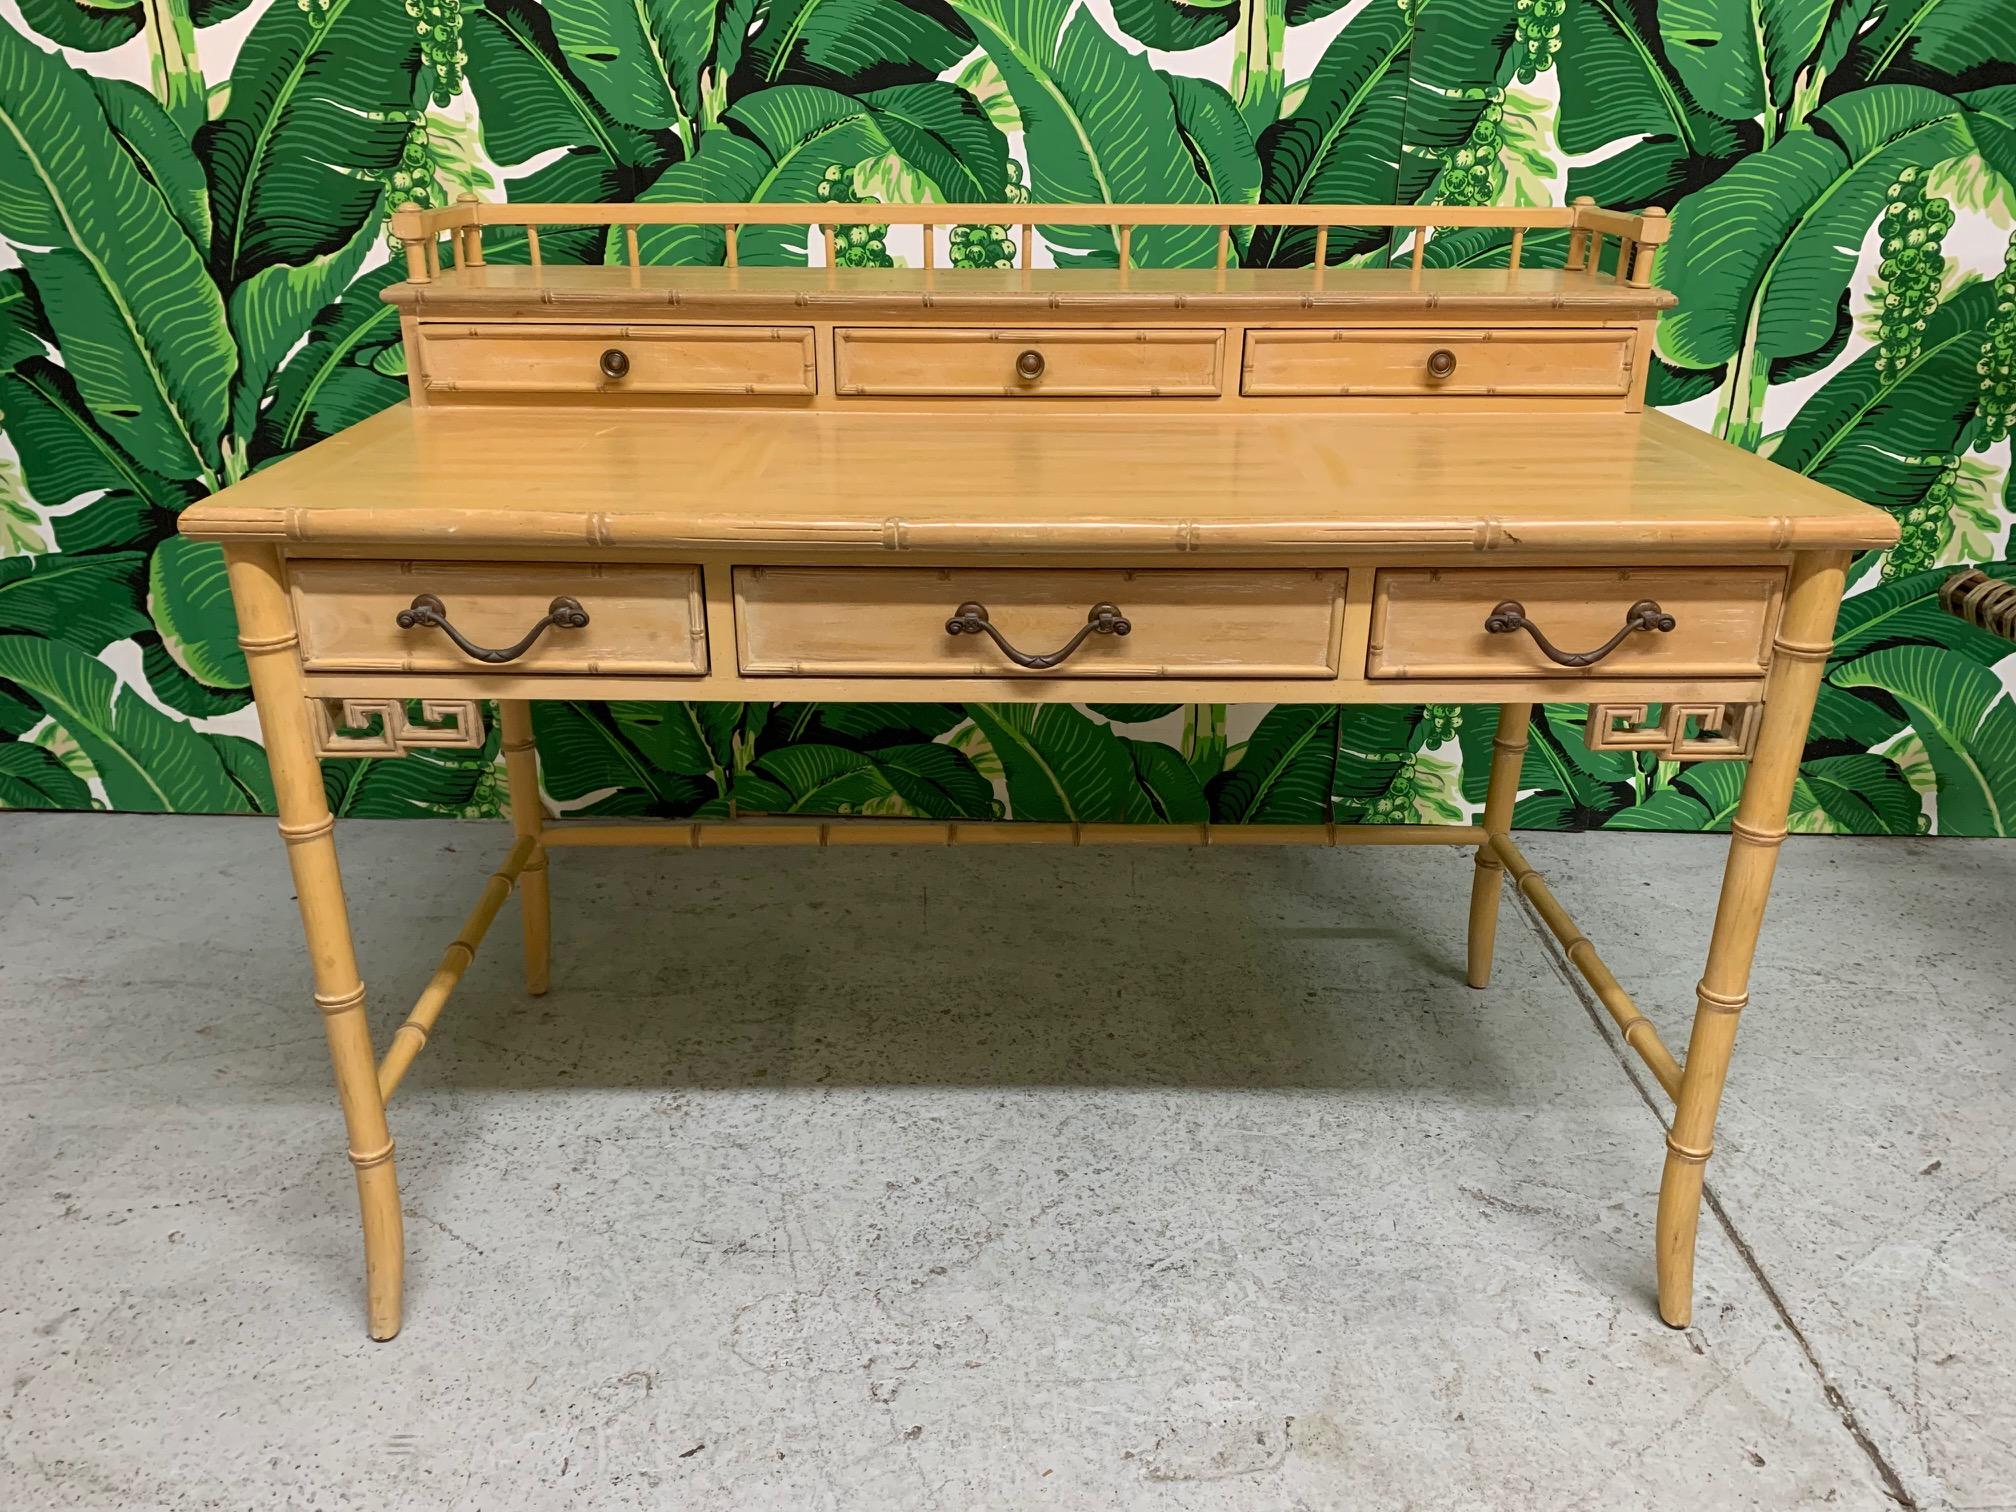 Midcentury writing desk designed by Raymond Sobota for Century Furniture features faux bamboo detailing with Greek key accents and a cerused finish. Solid wood construction. Good condition with only minor imperfections consistent with age.